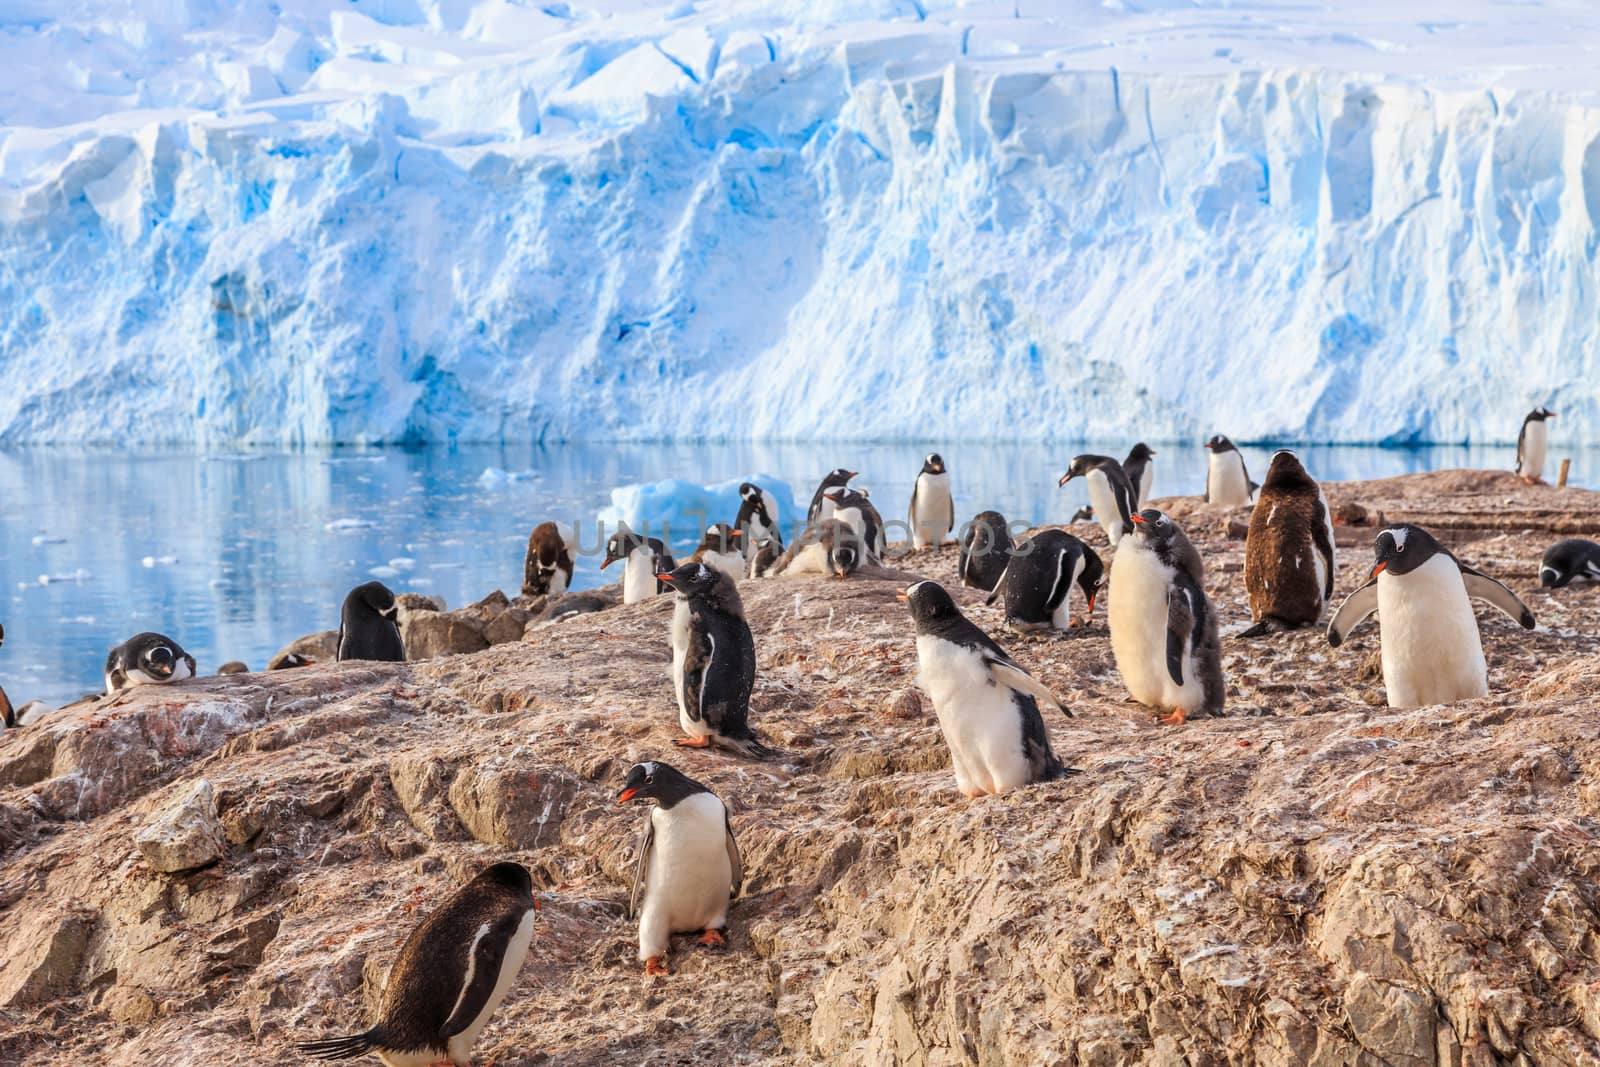 Various gentoo penguins overcrowded the rocky coastline and glacier in the background at Neco bay, Antarctic